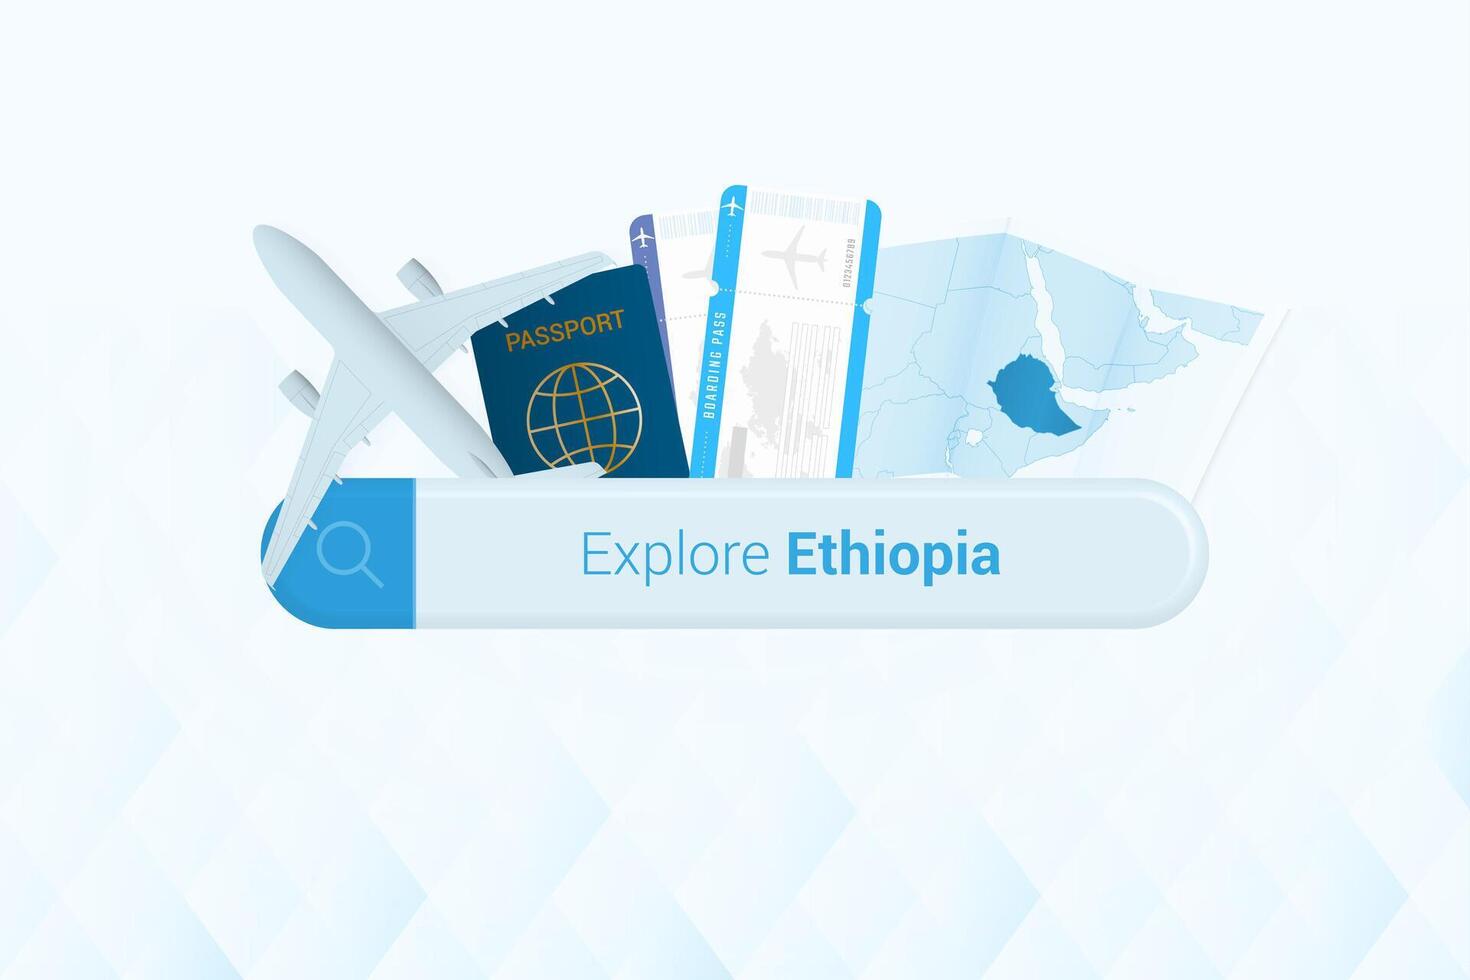 Searching tickets to Ethiopia or travel destination in Ethiopia. Searching bar with airplane, passport, boarding pass, tickets and map. vector